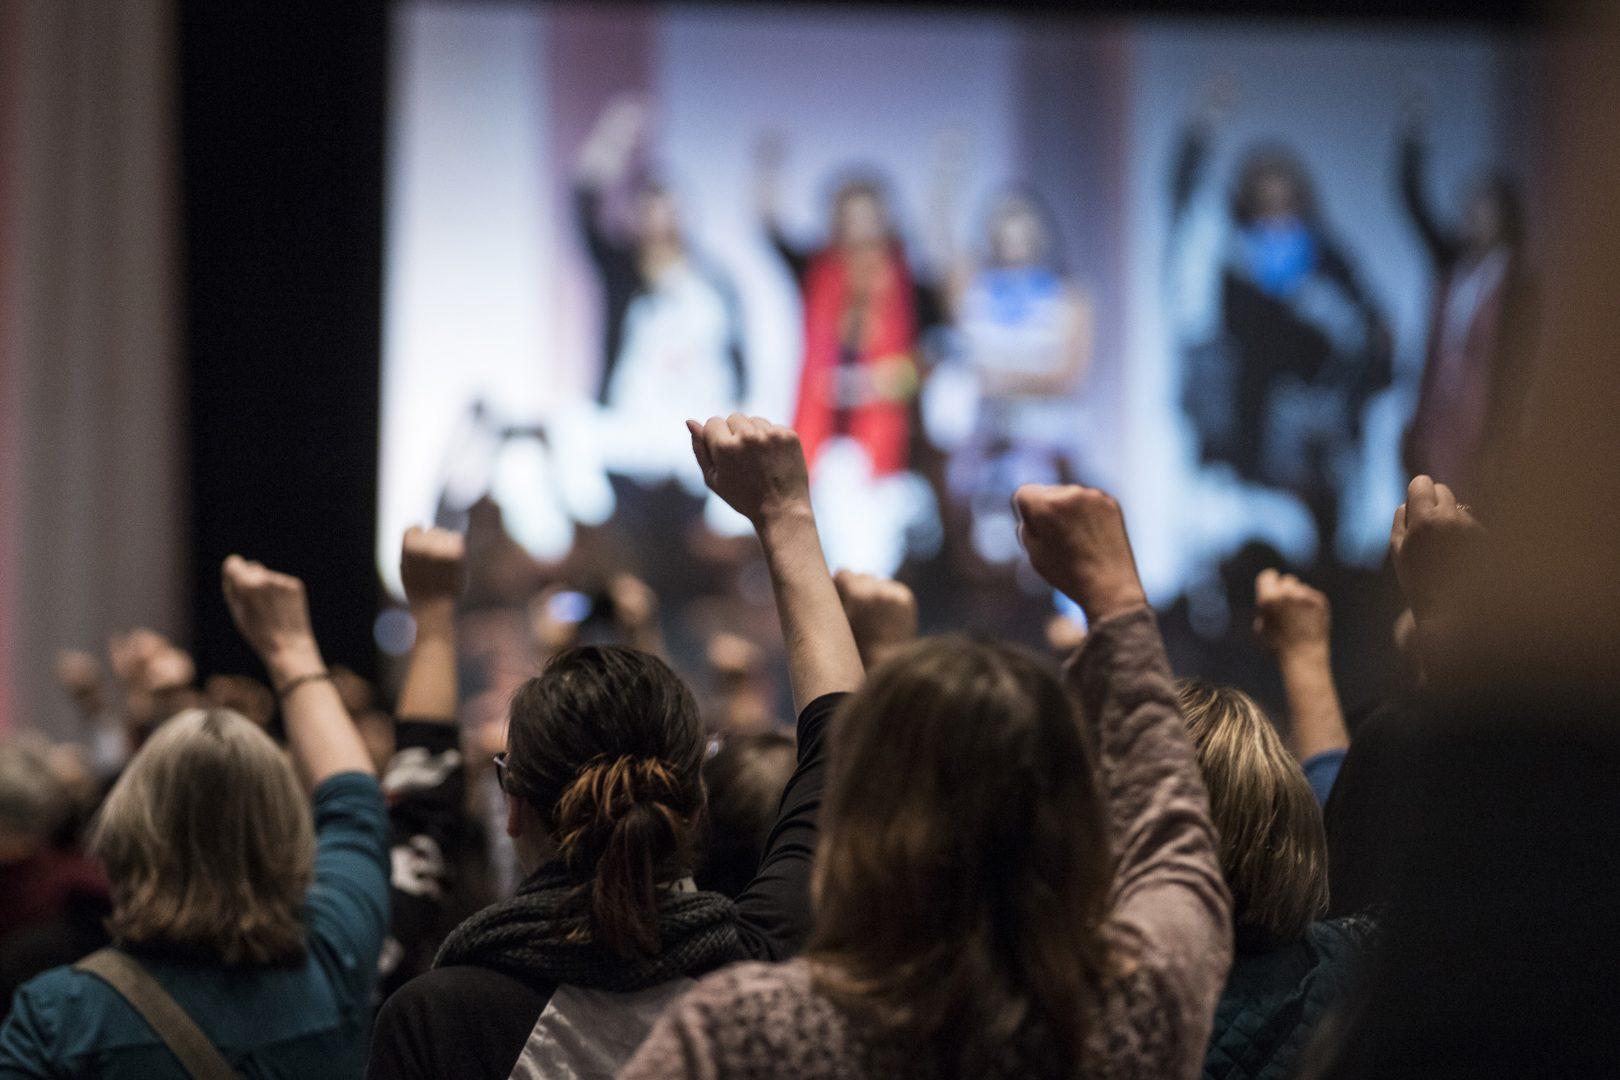 Attendees raise their fists as they hear the opening prayers song offered by five indigenous women during The Womens Convention at Cobo Center in downtown Detroit, Friday, Oct. 27, 2017. (Junfu Han/Detroit Free Press/TNS)